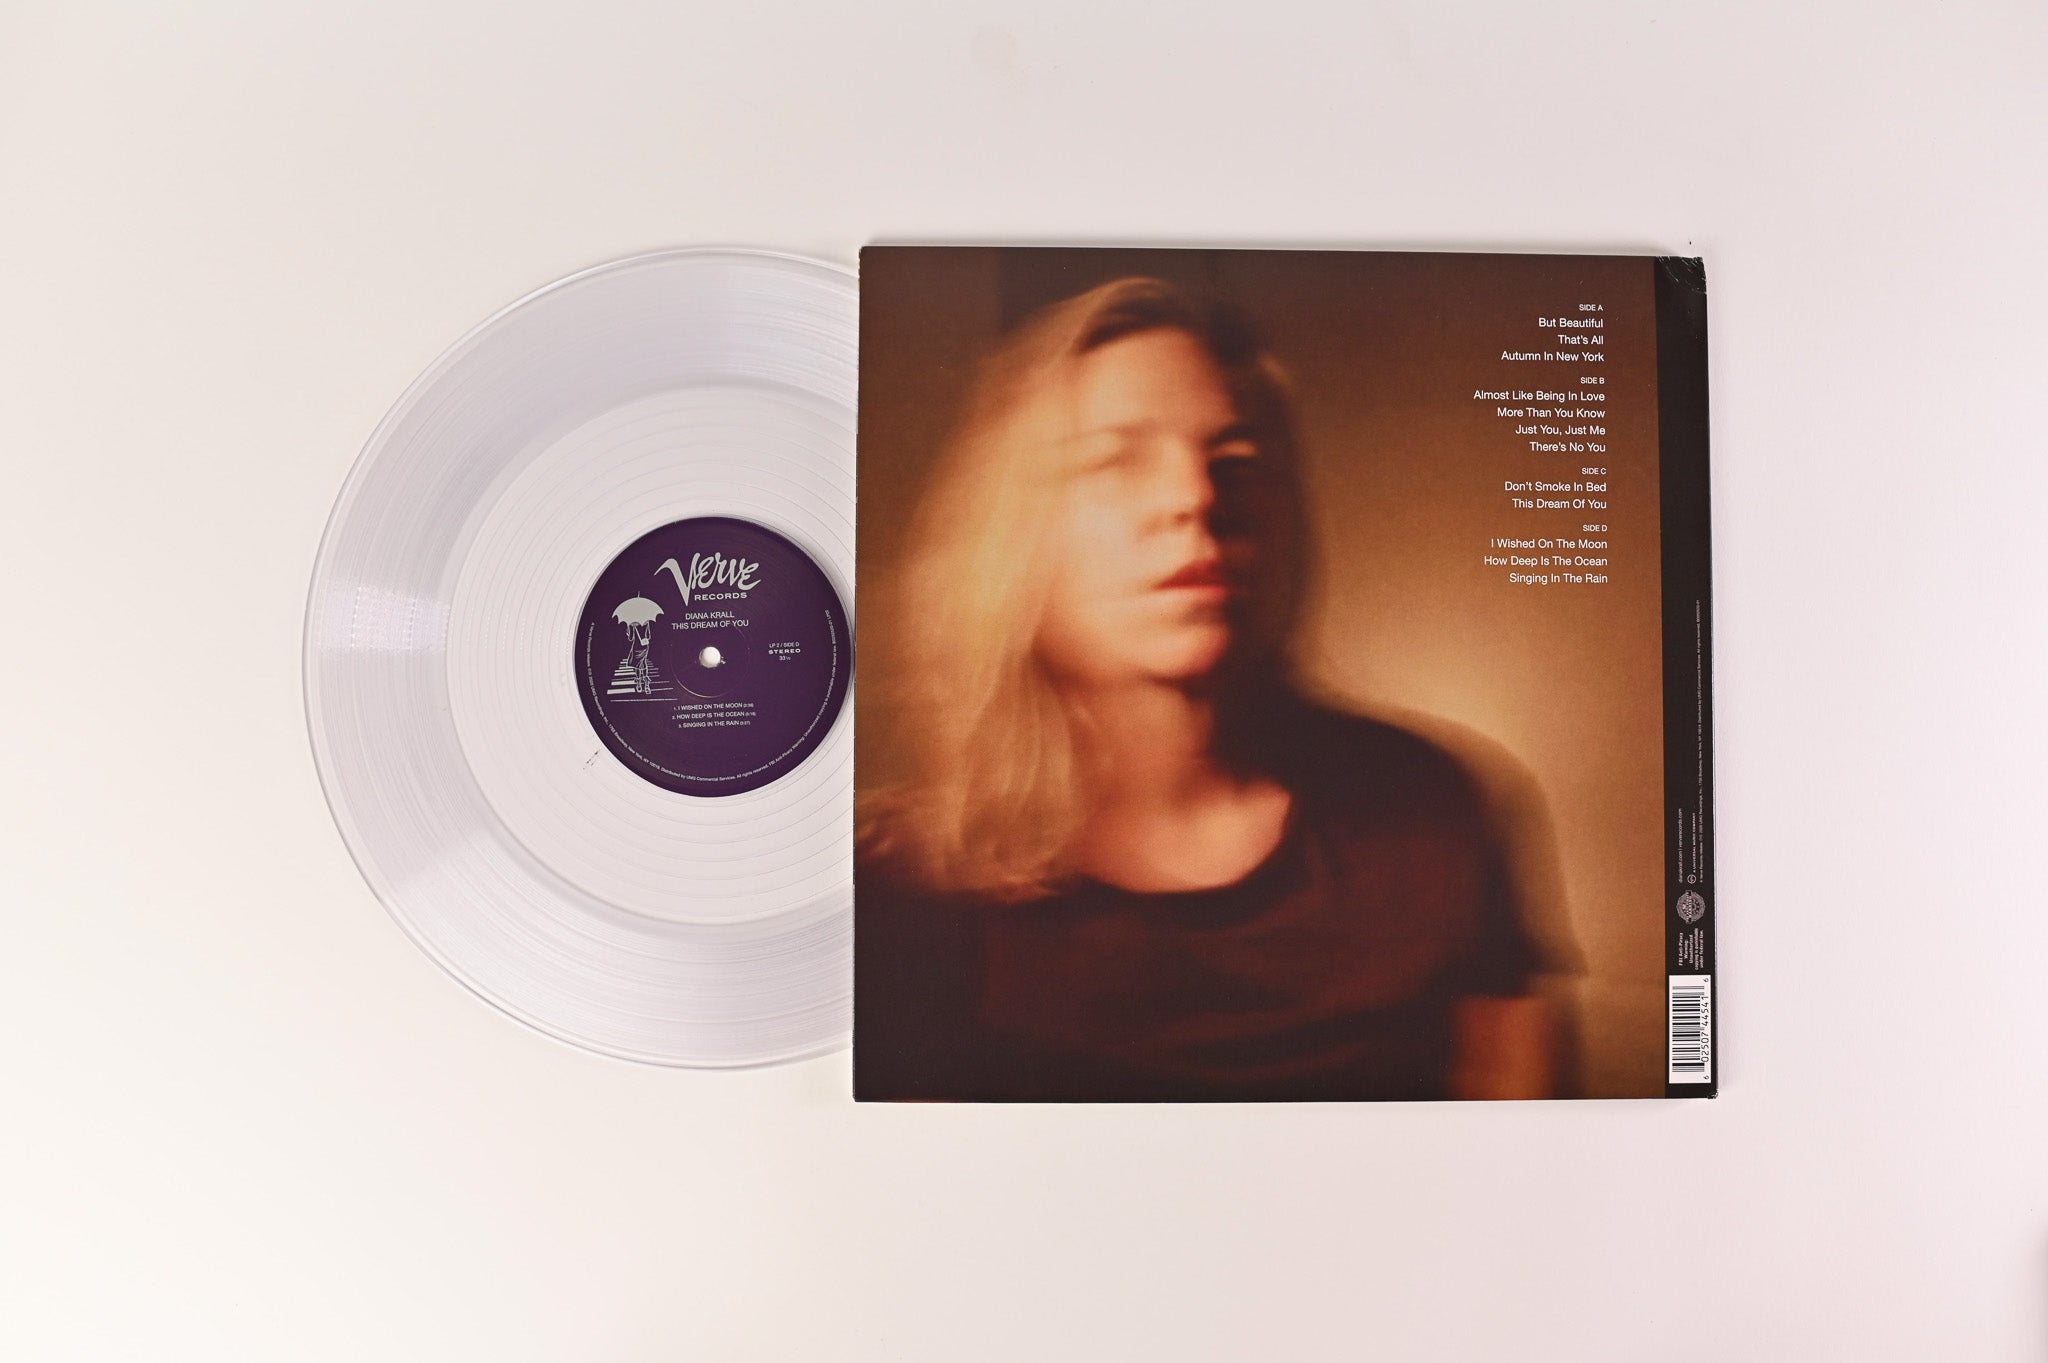 Diana Krall - This Dream Of You on Verve Ltd Clear Vinyl